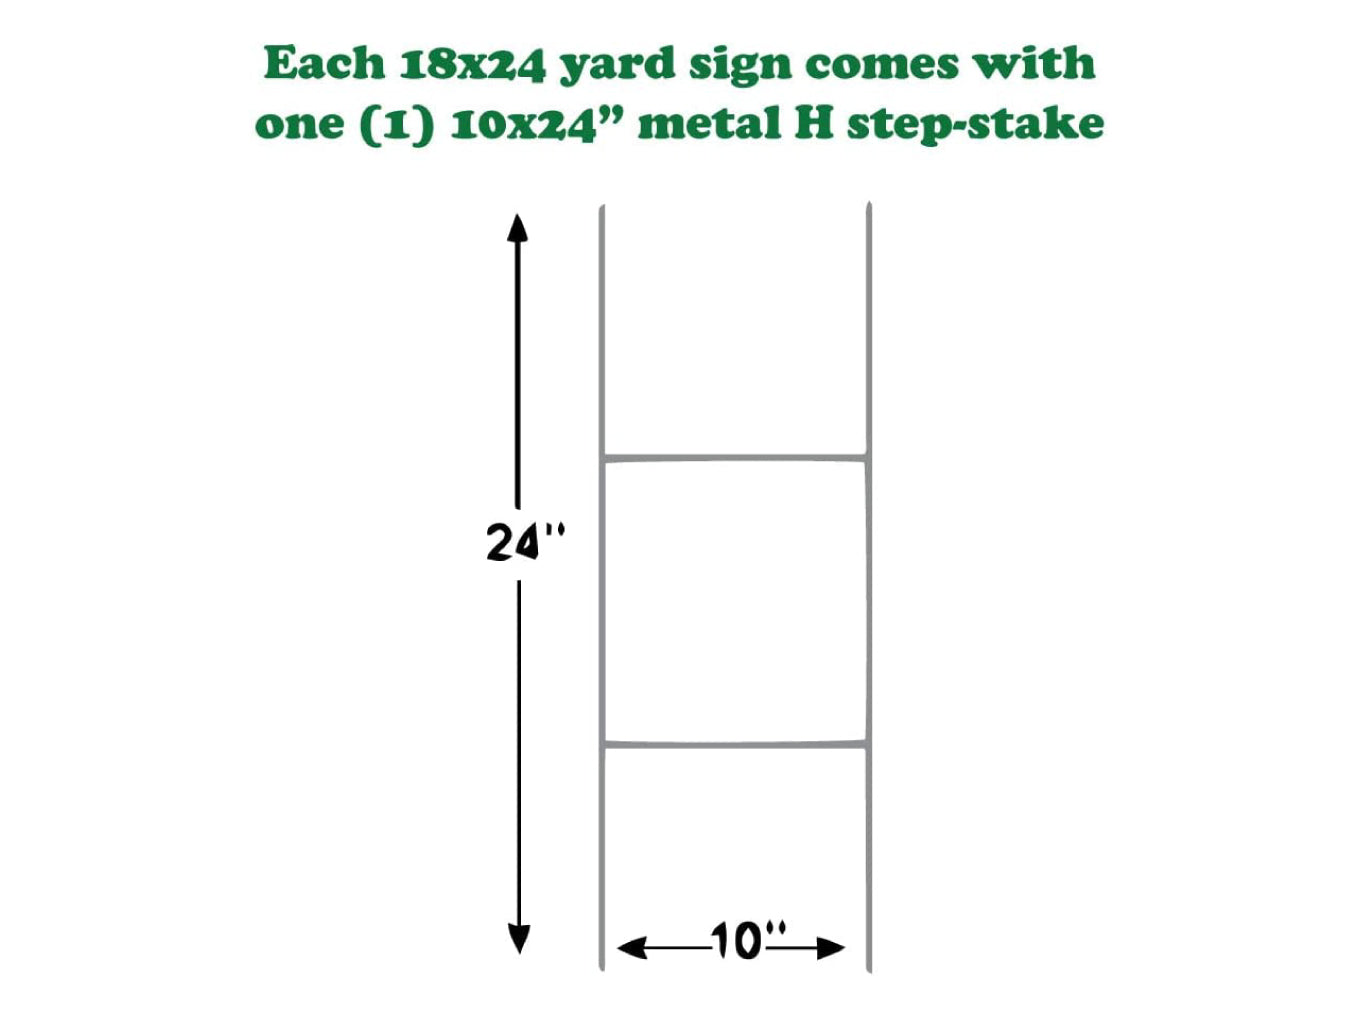 Community Garage Sale, Yard Sale Sign, 24x18 or 36x24 inch, Double Sided, H-Stake Included, v1